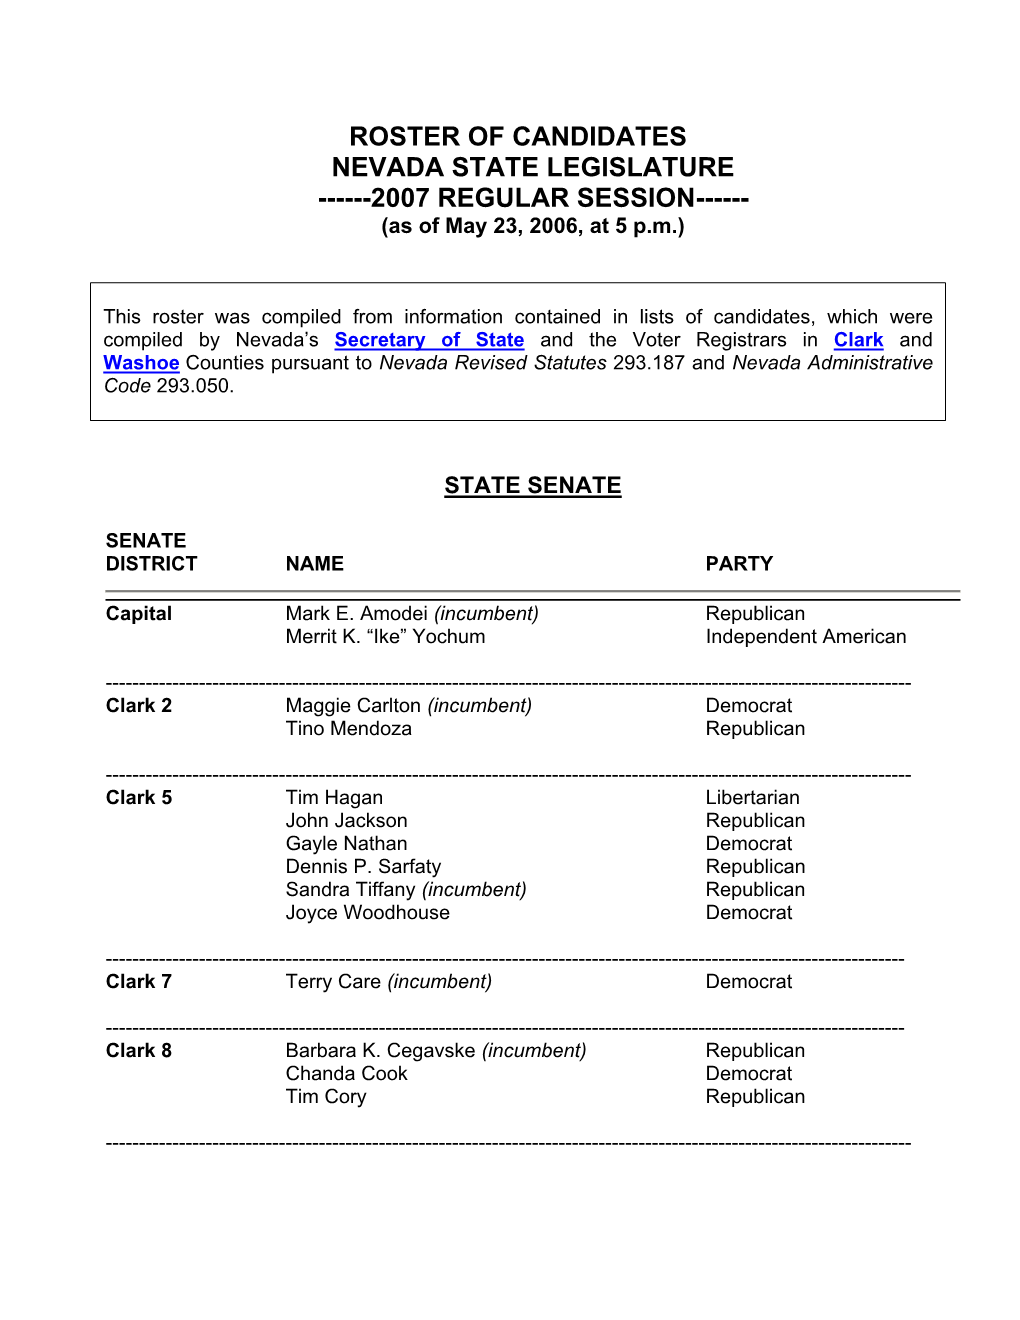 Primary Election Roster of Candidates for 2007